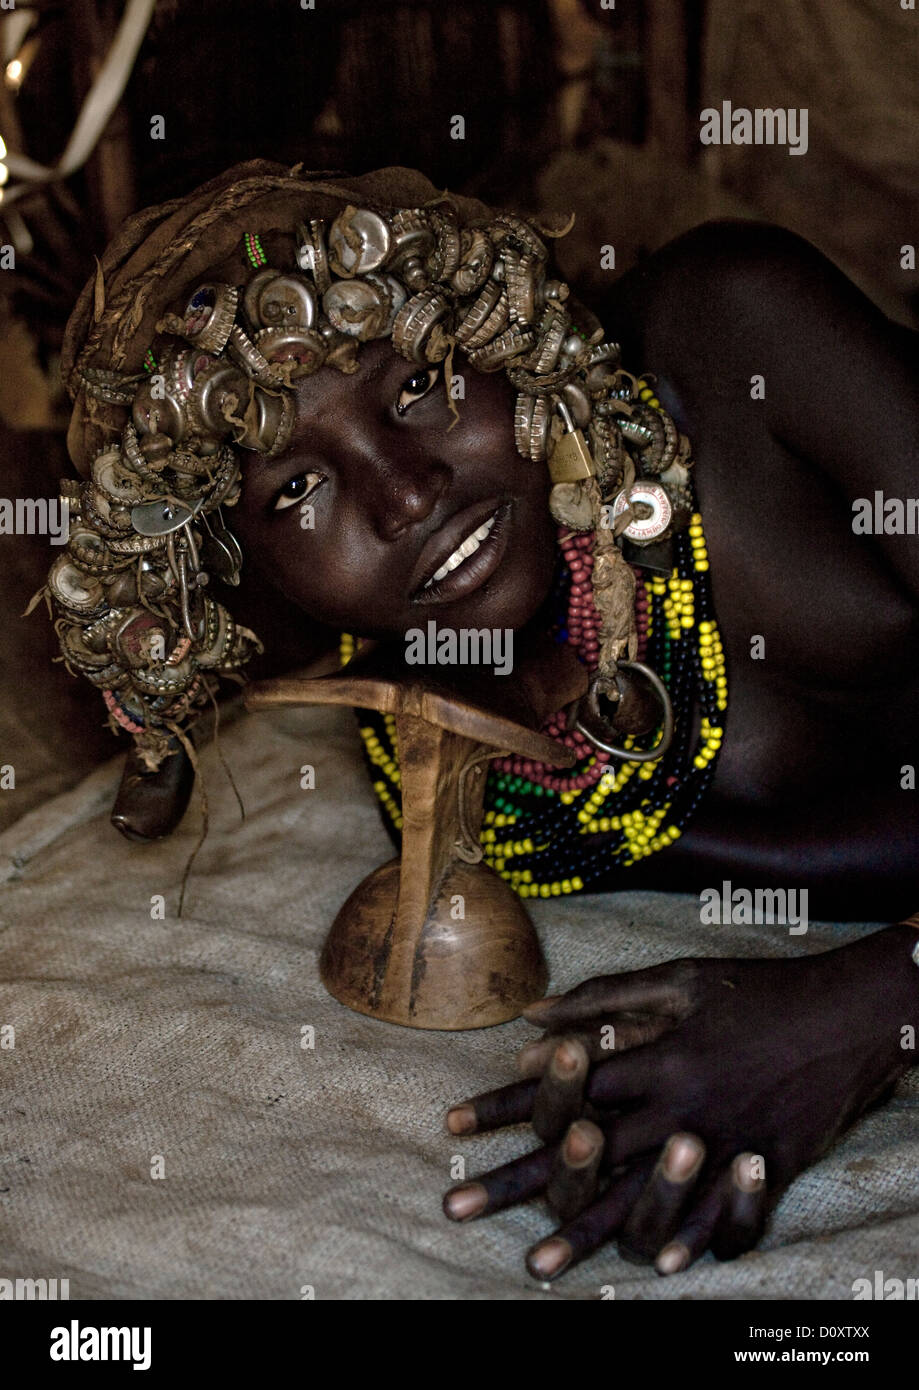 Portrait Of A Dassanech Tribe Girl With Wig Made Of Caps Using Headrest To Lay Down, Omorate, Omo Valley, Ethiopia Stock Photo